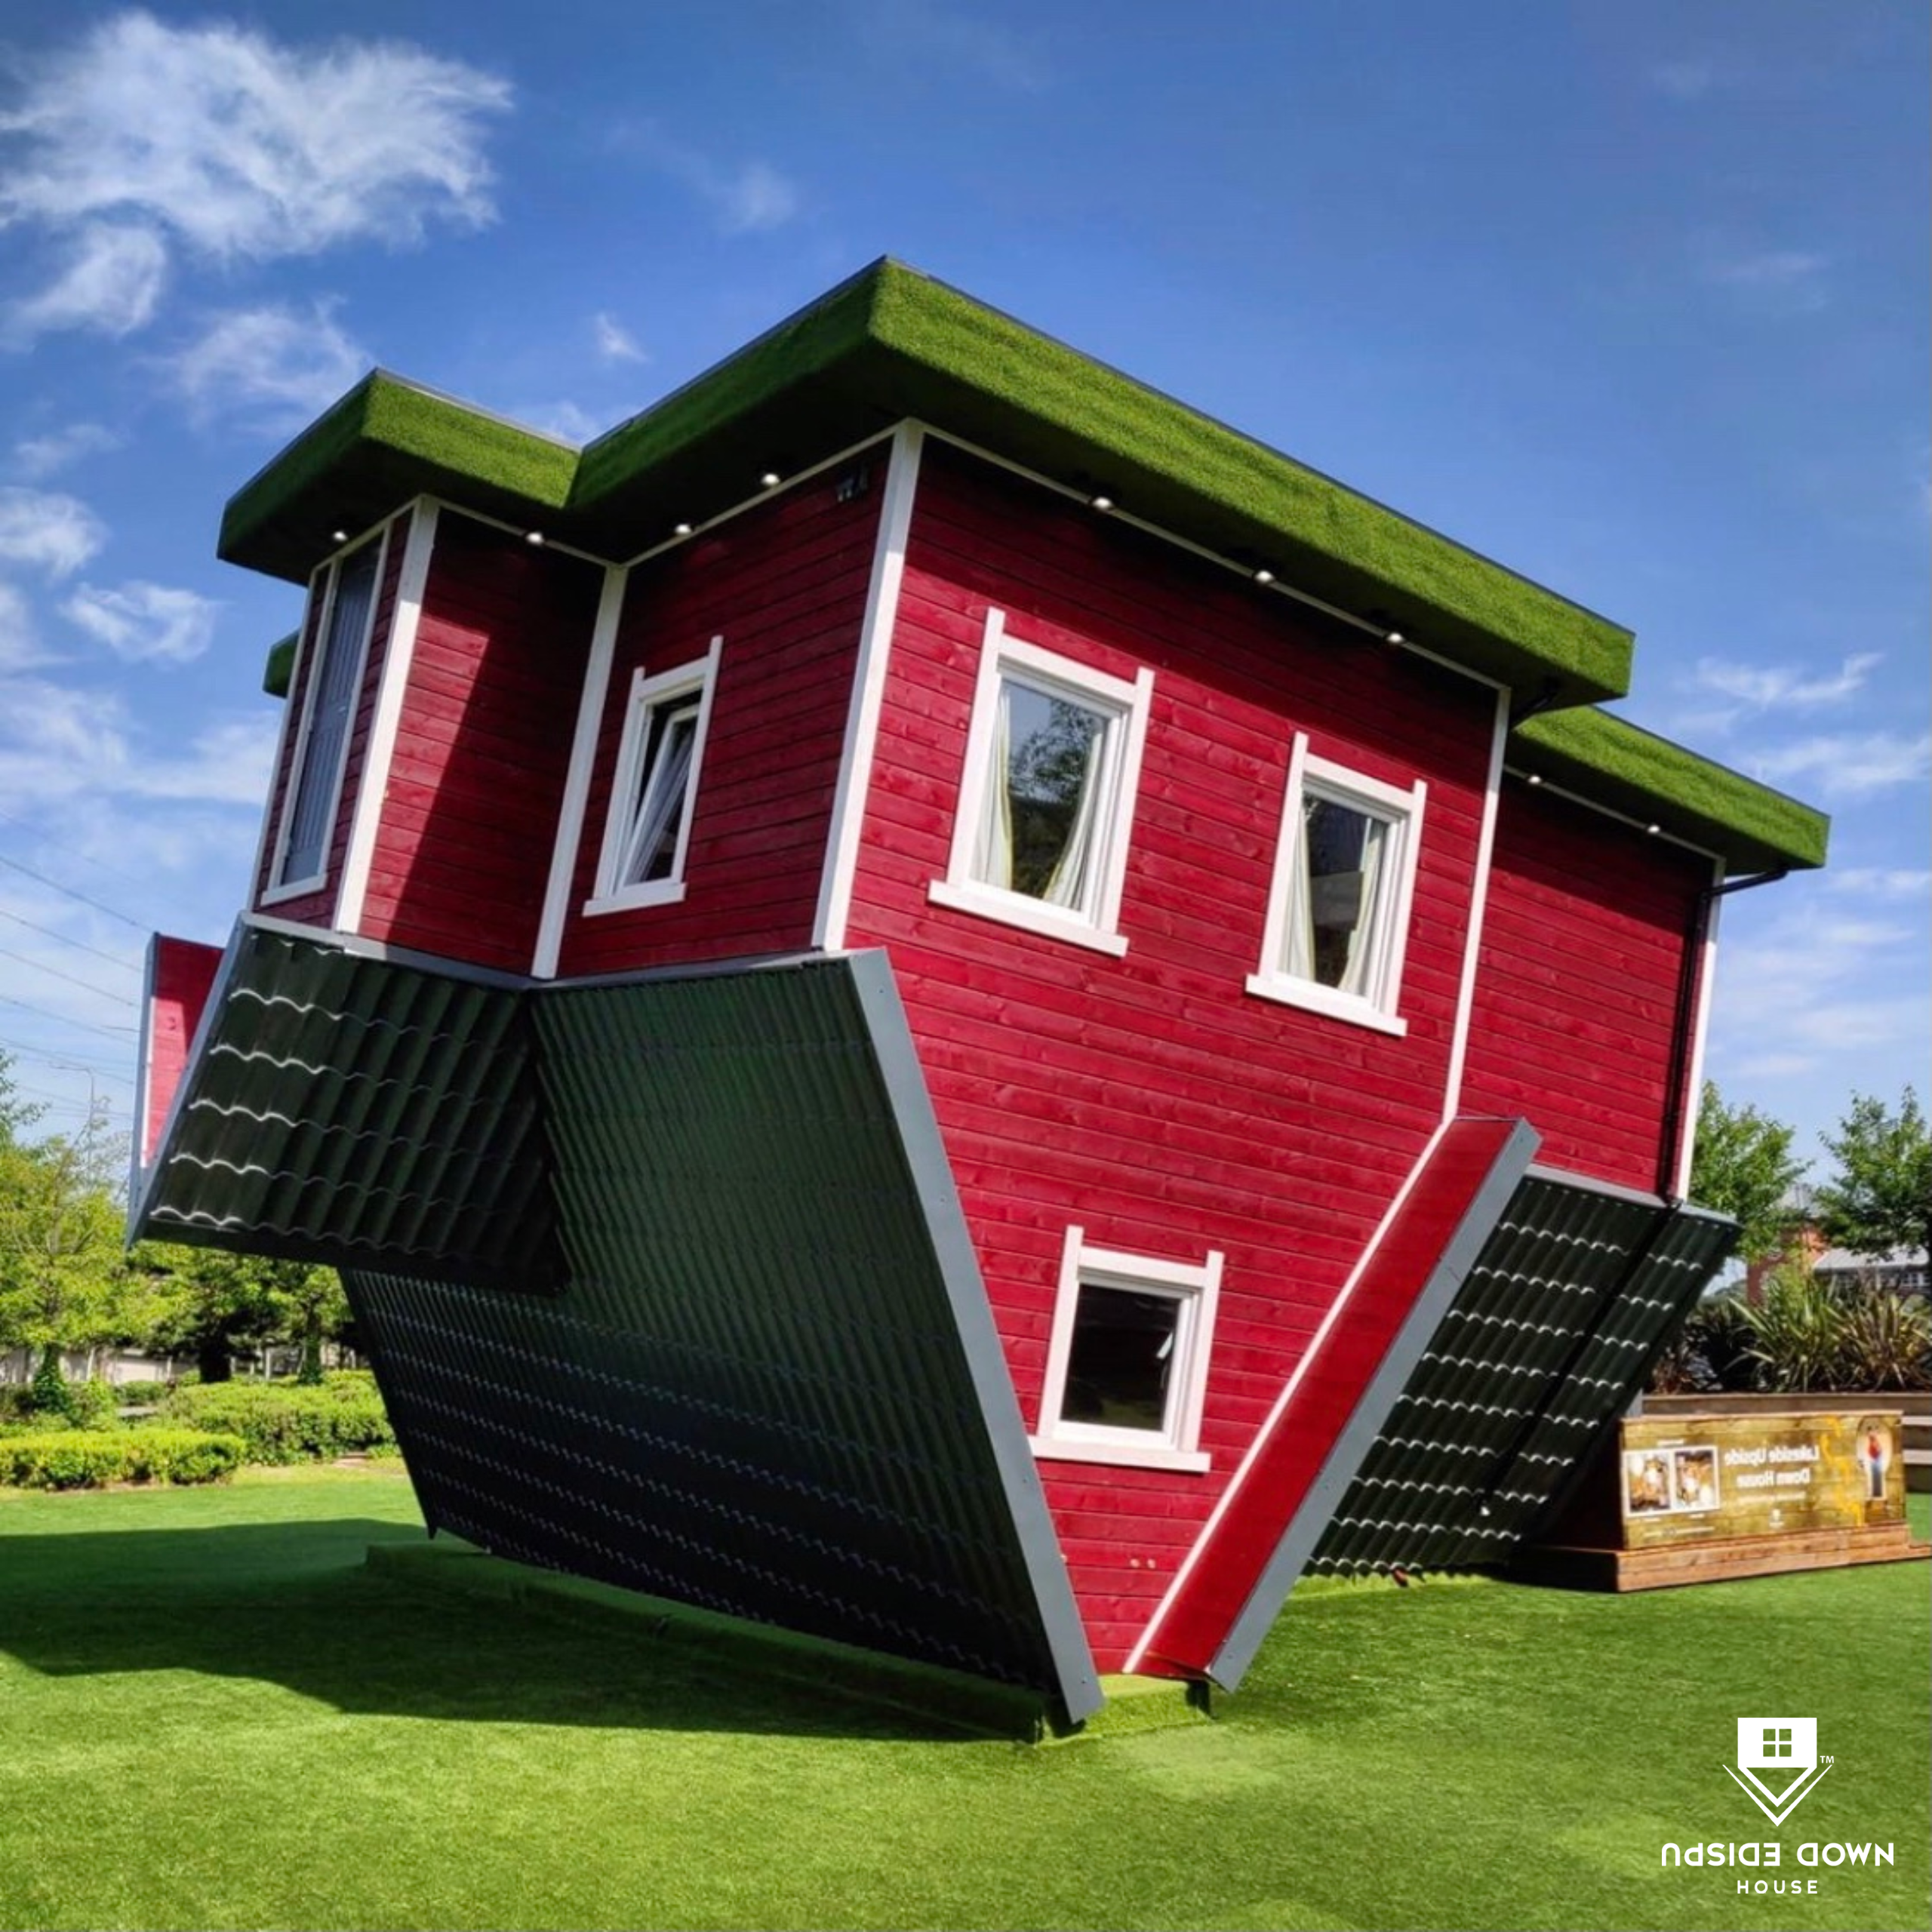 Upside Down House Lakeside - Indoor in West Thurrock, Grays